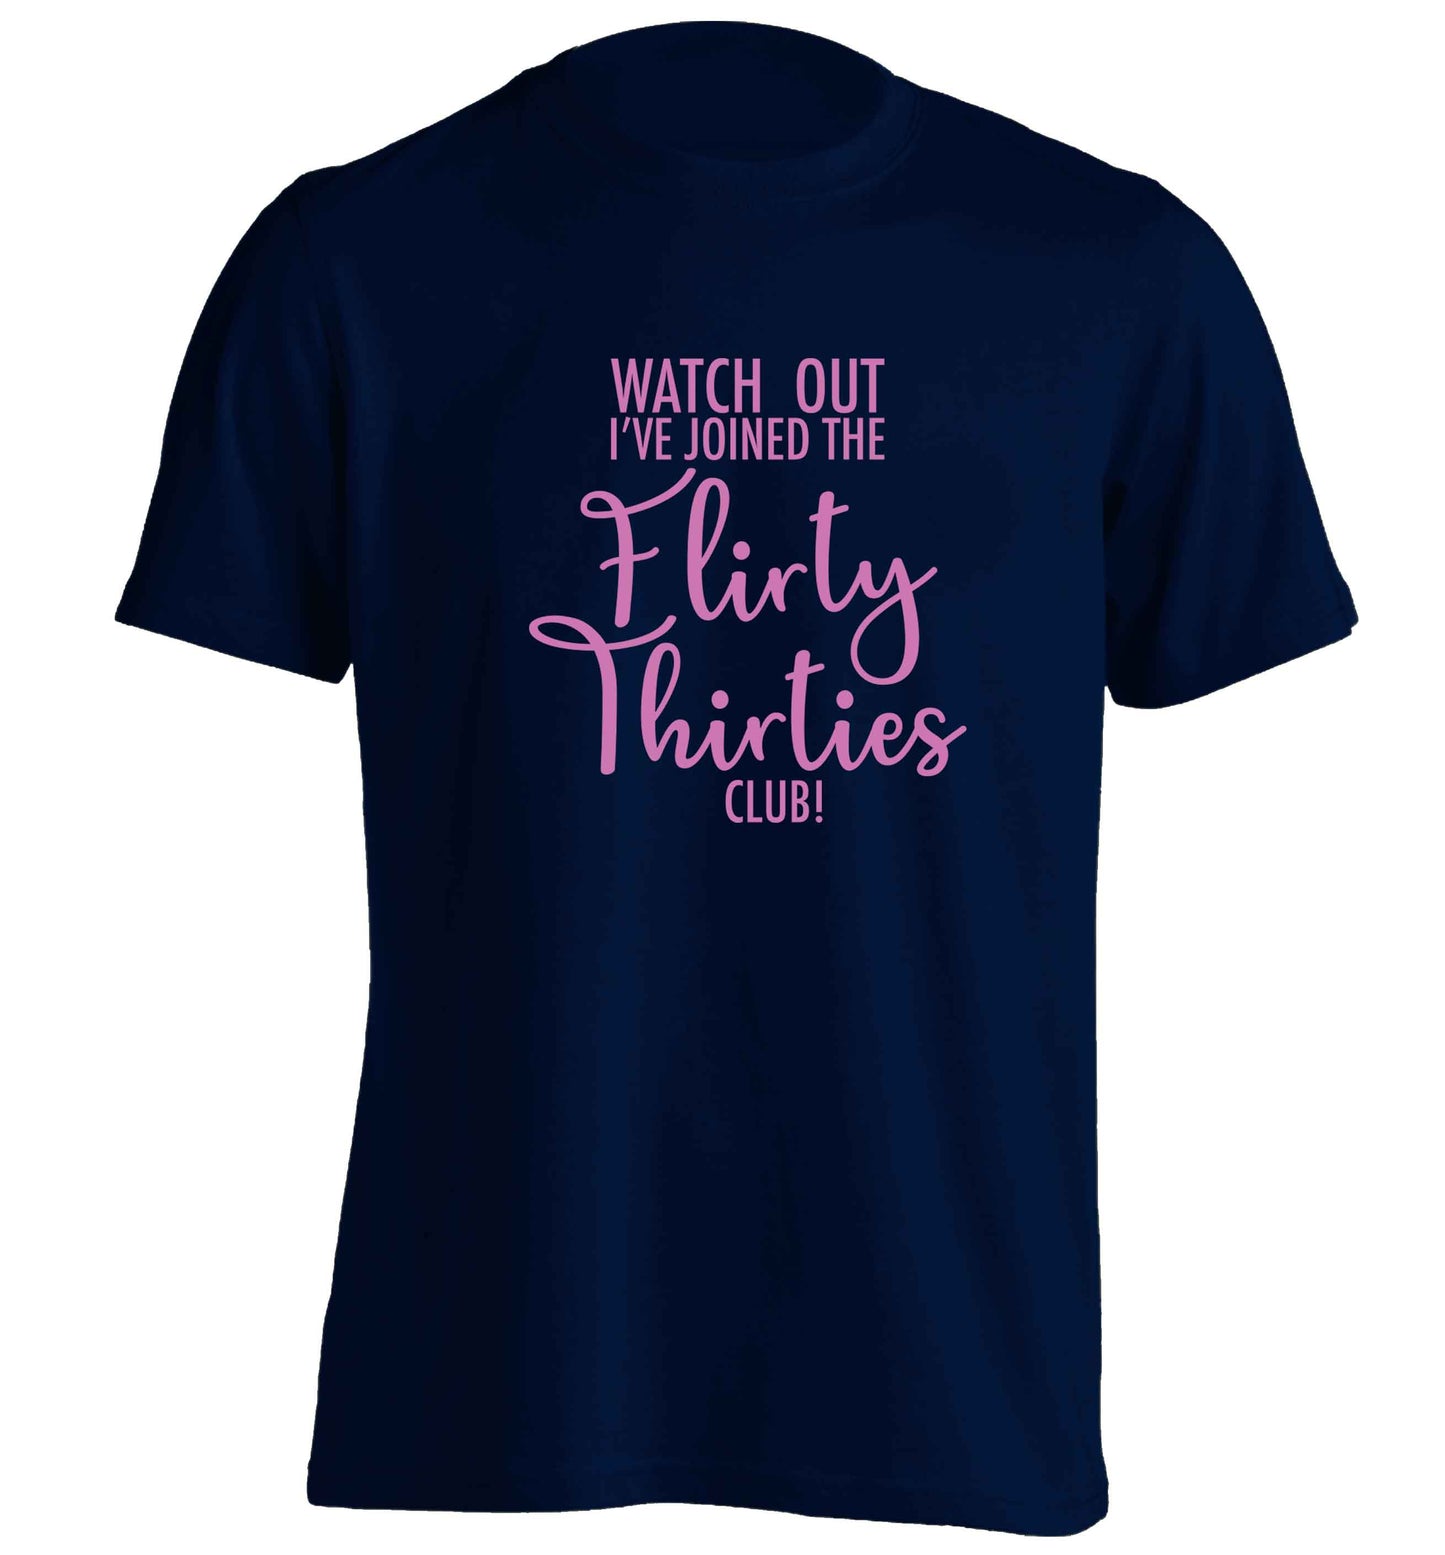 Watch out I've joined the flirty thirties club adults unisex navy Tshirt 2XL